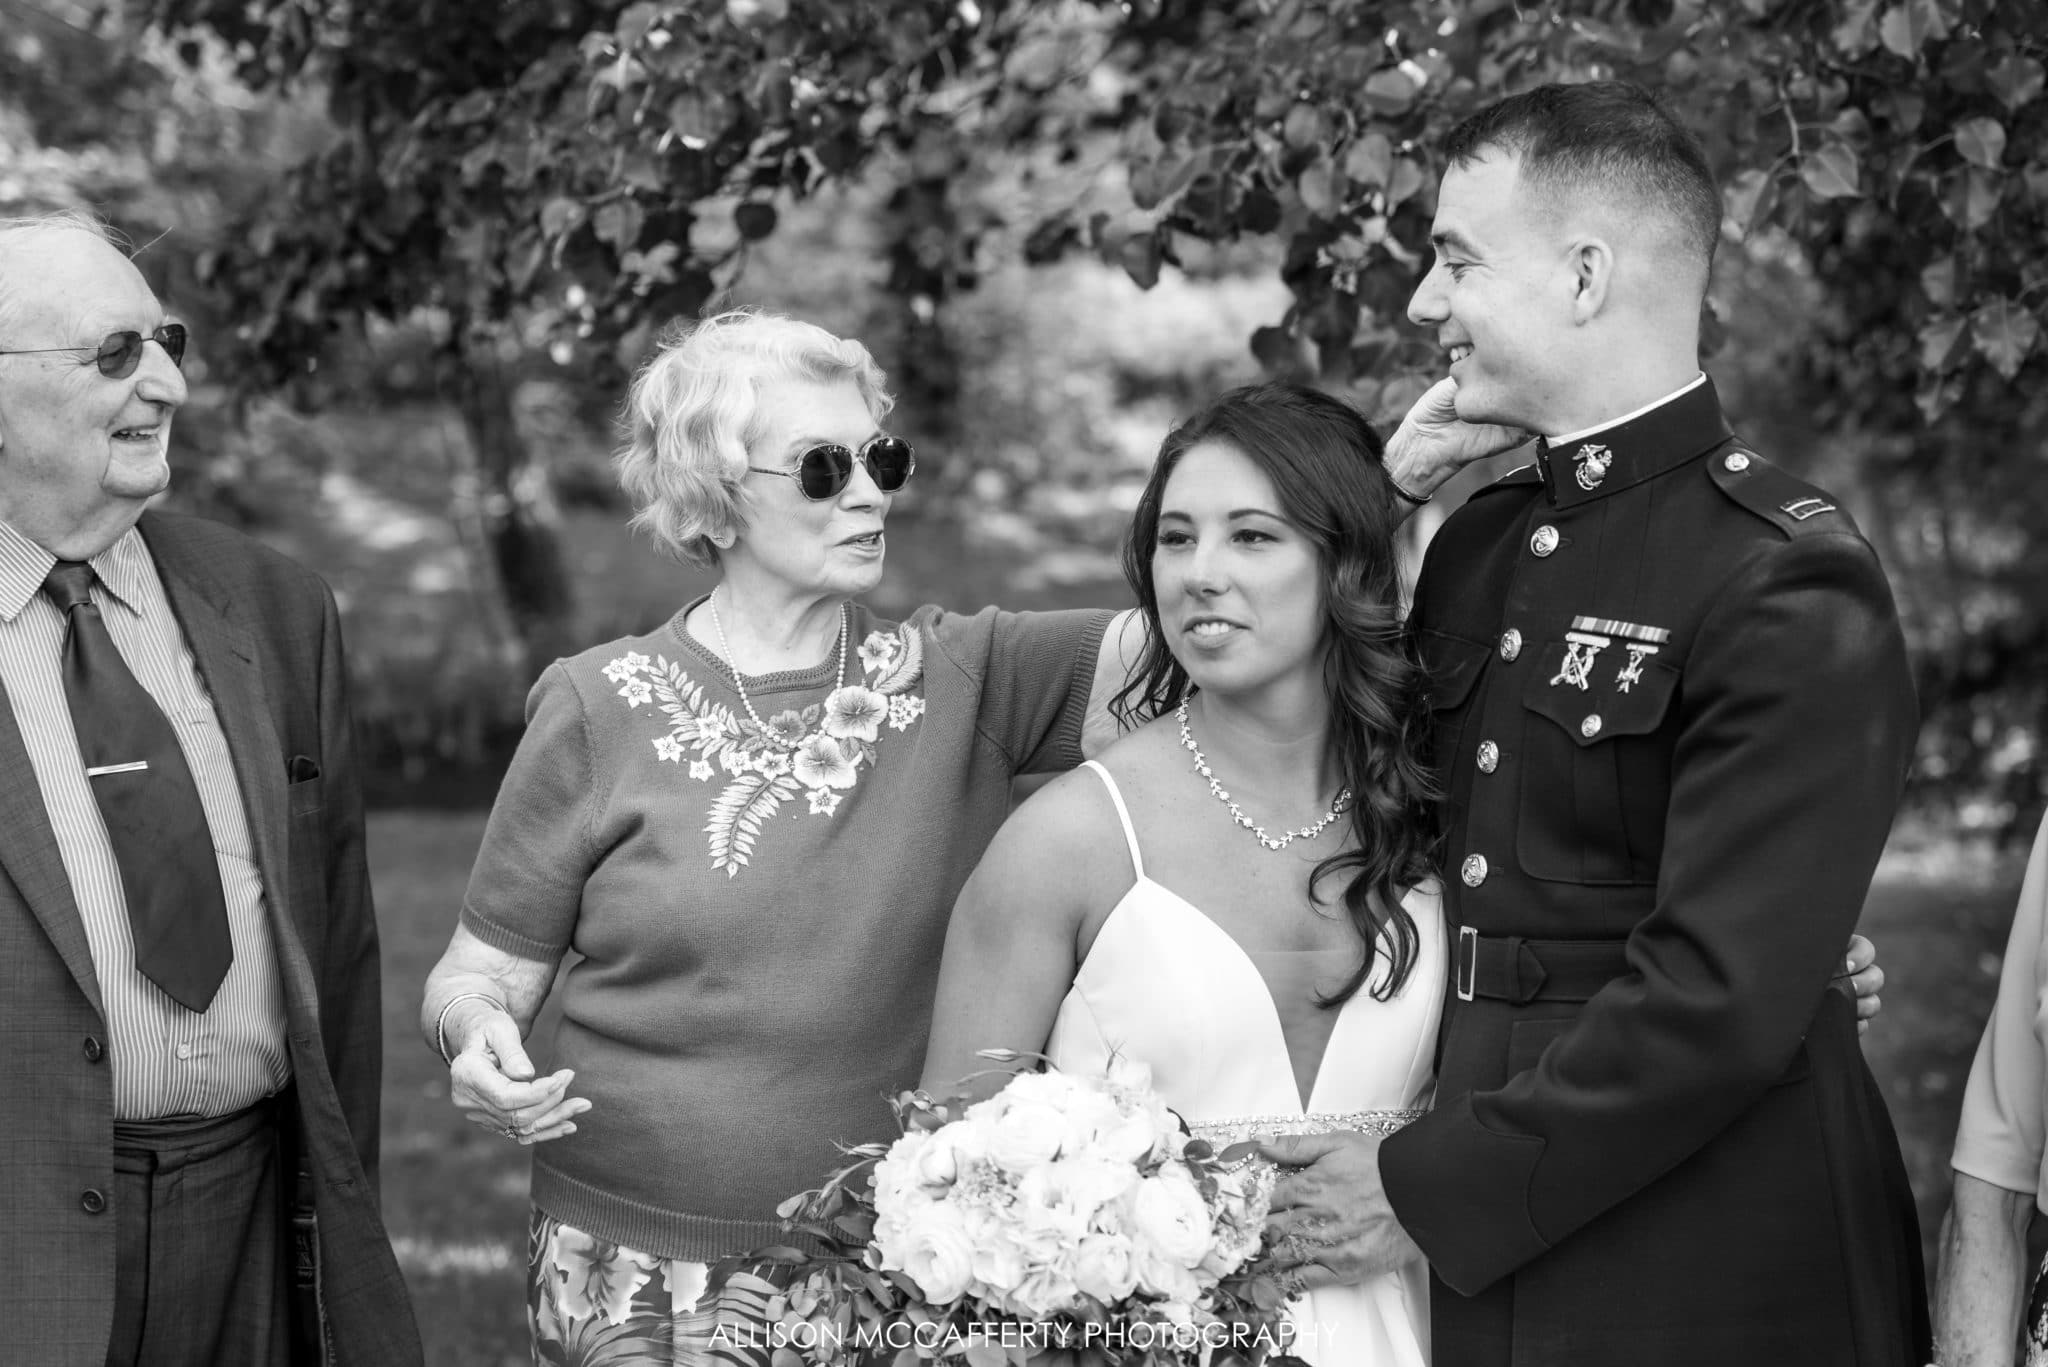 Grandmother touching grandson's face at his wedding